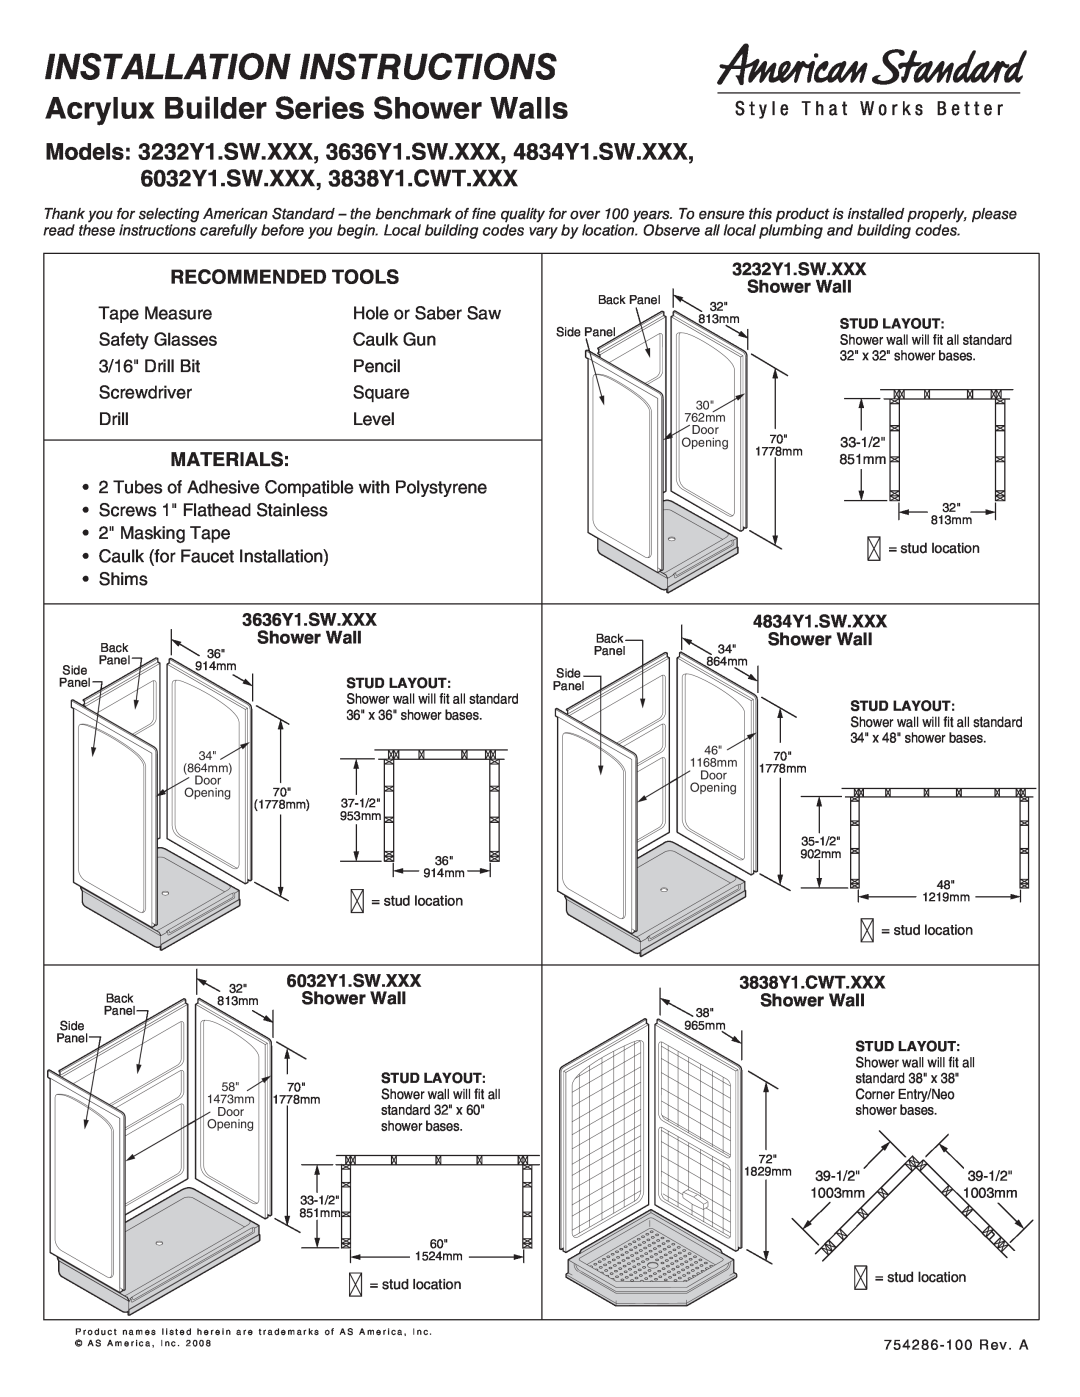 American Standard 6032Y1.SW.XXX installation instructions Recommended Tools, Materials, Installation Instructions 